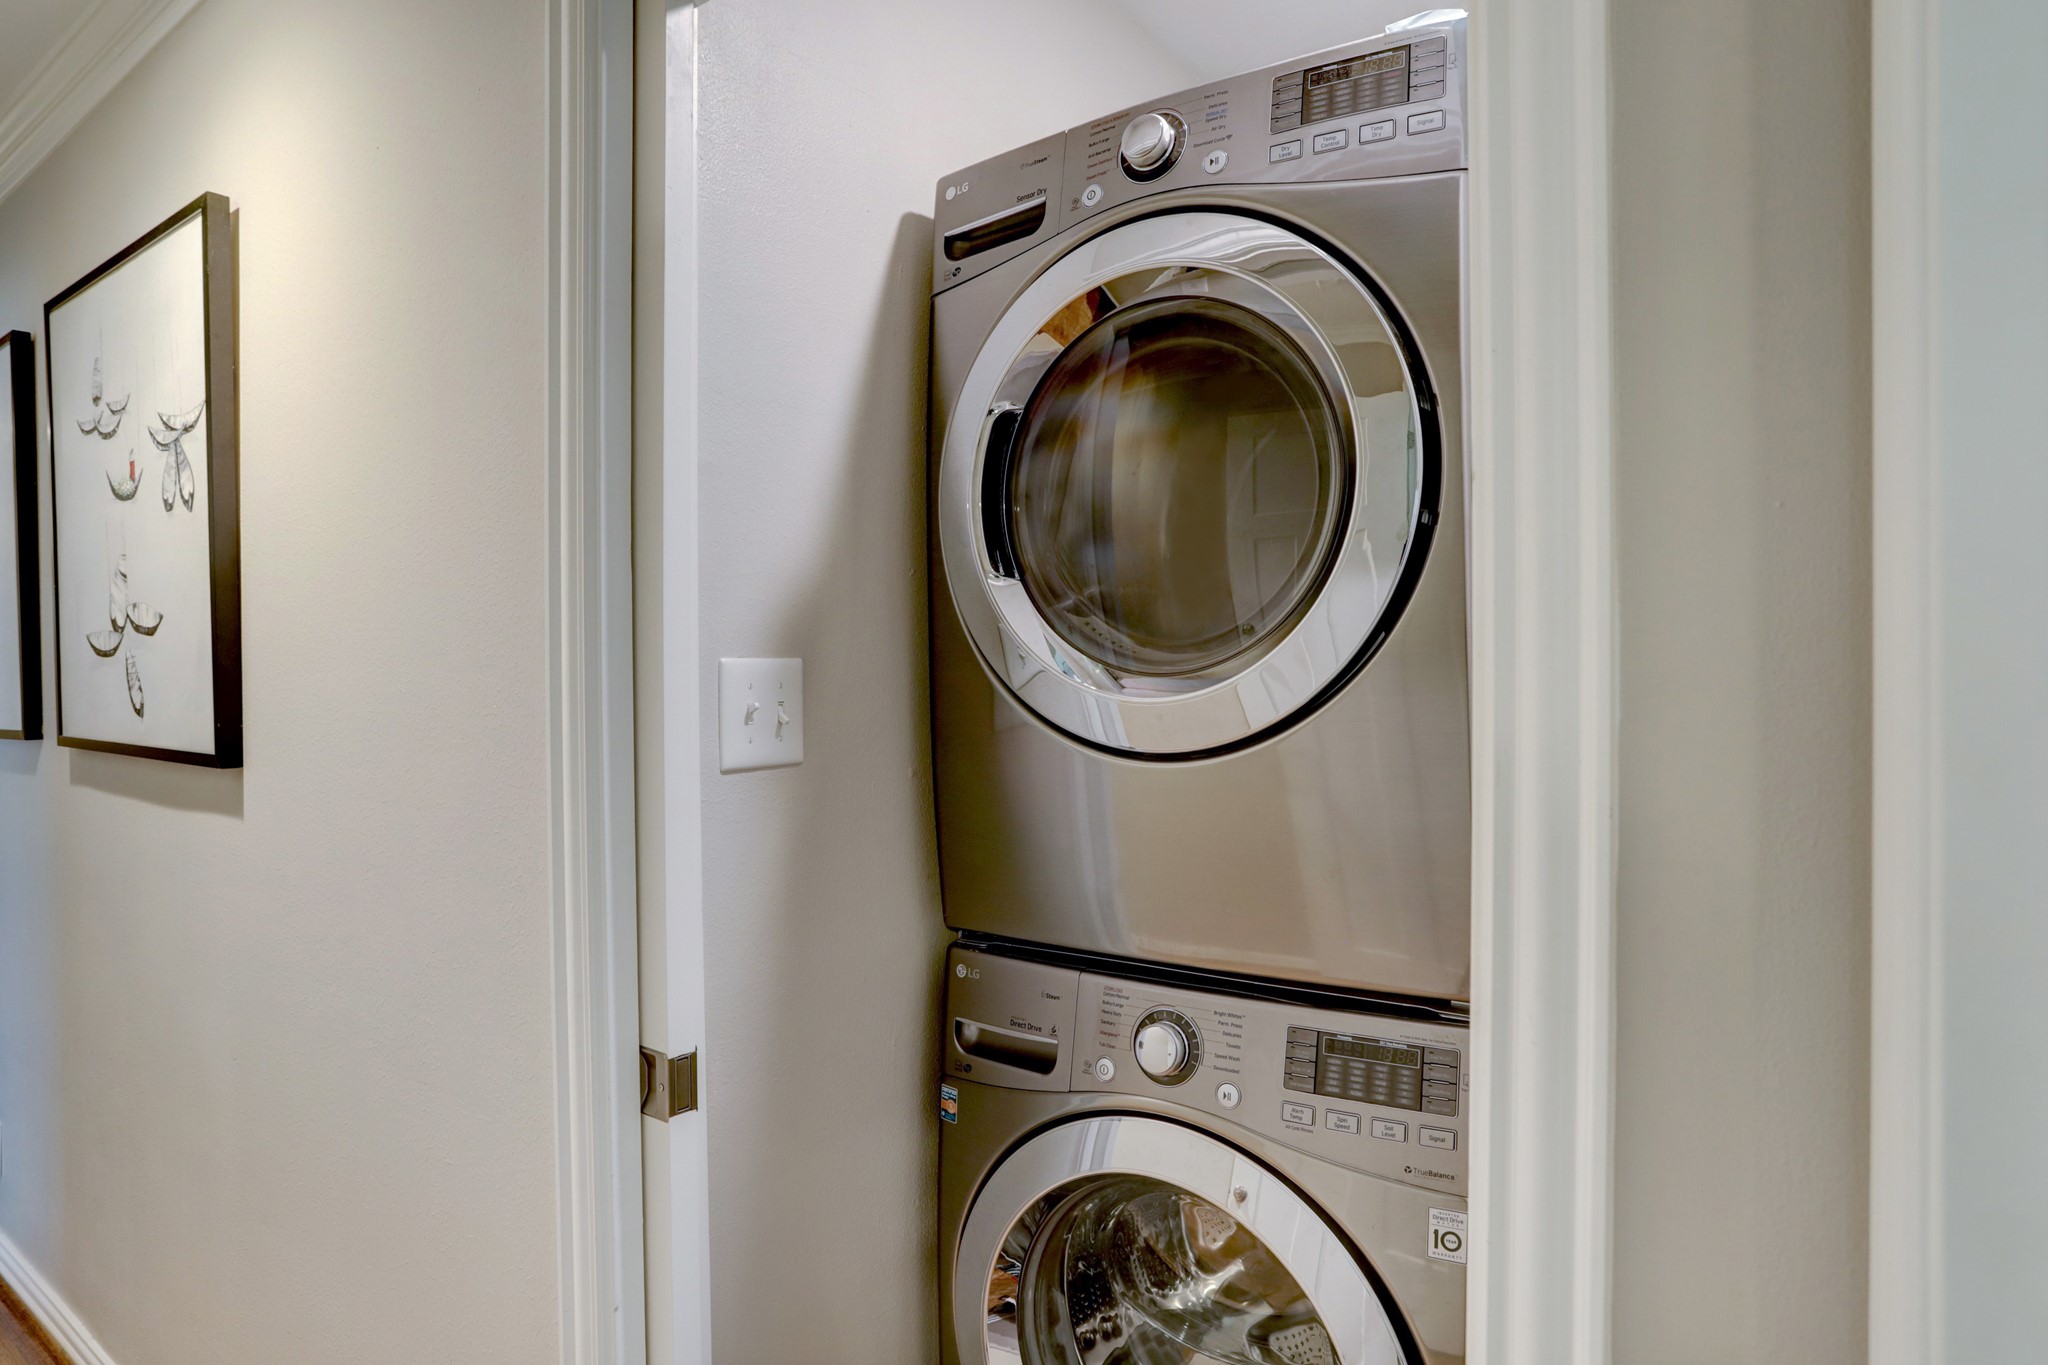 Laundry area conveniently located in hallway with 3 additional bedrooms.